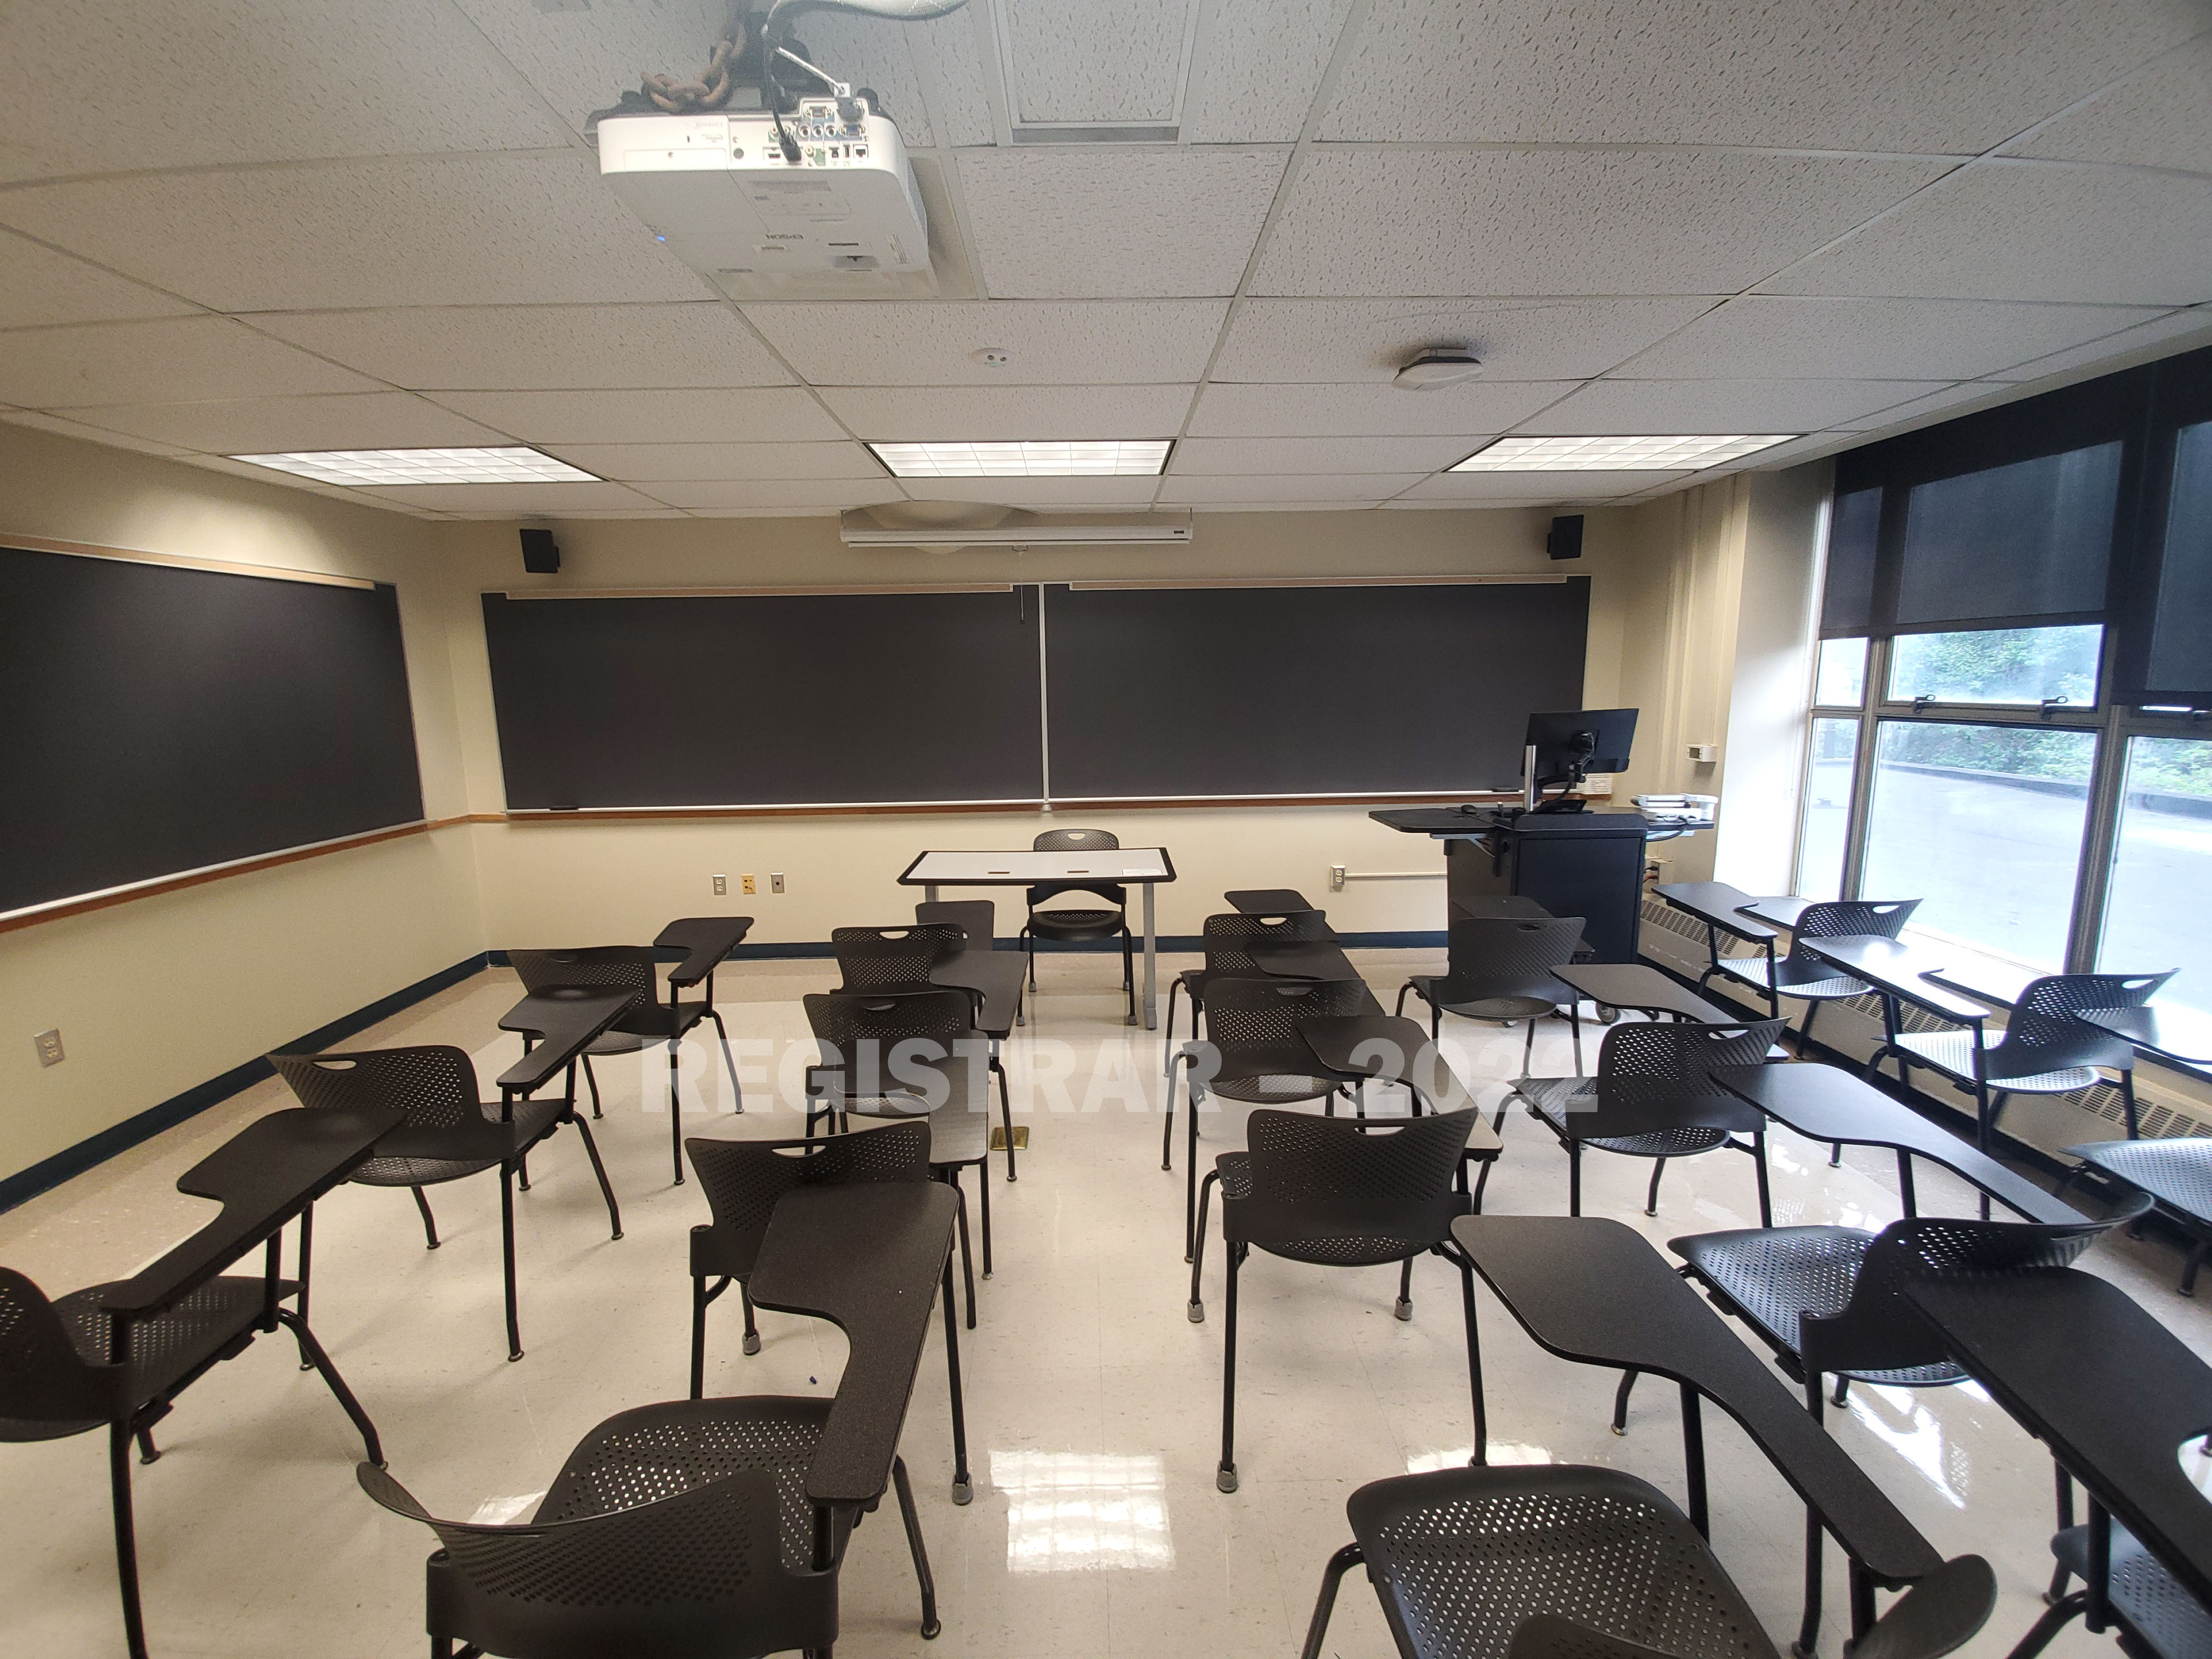 Enarson Classroom Building room 314 ultra wide angle view from the back of the room